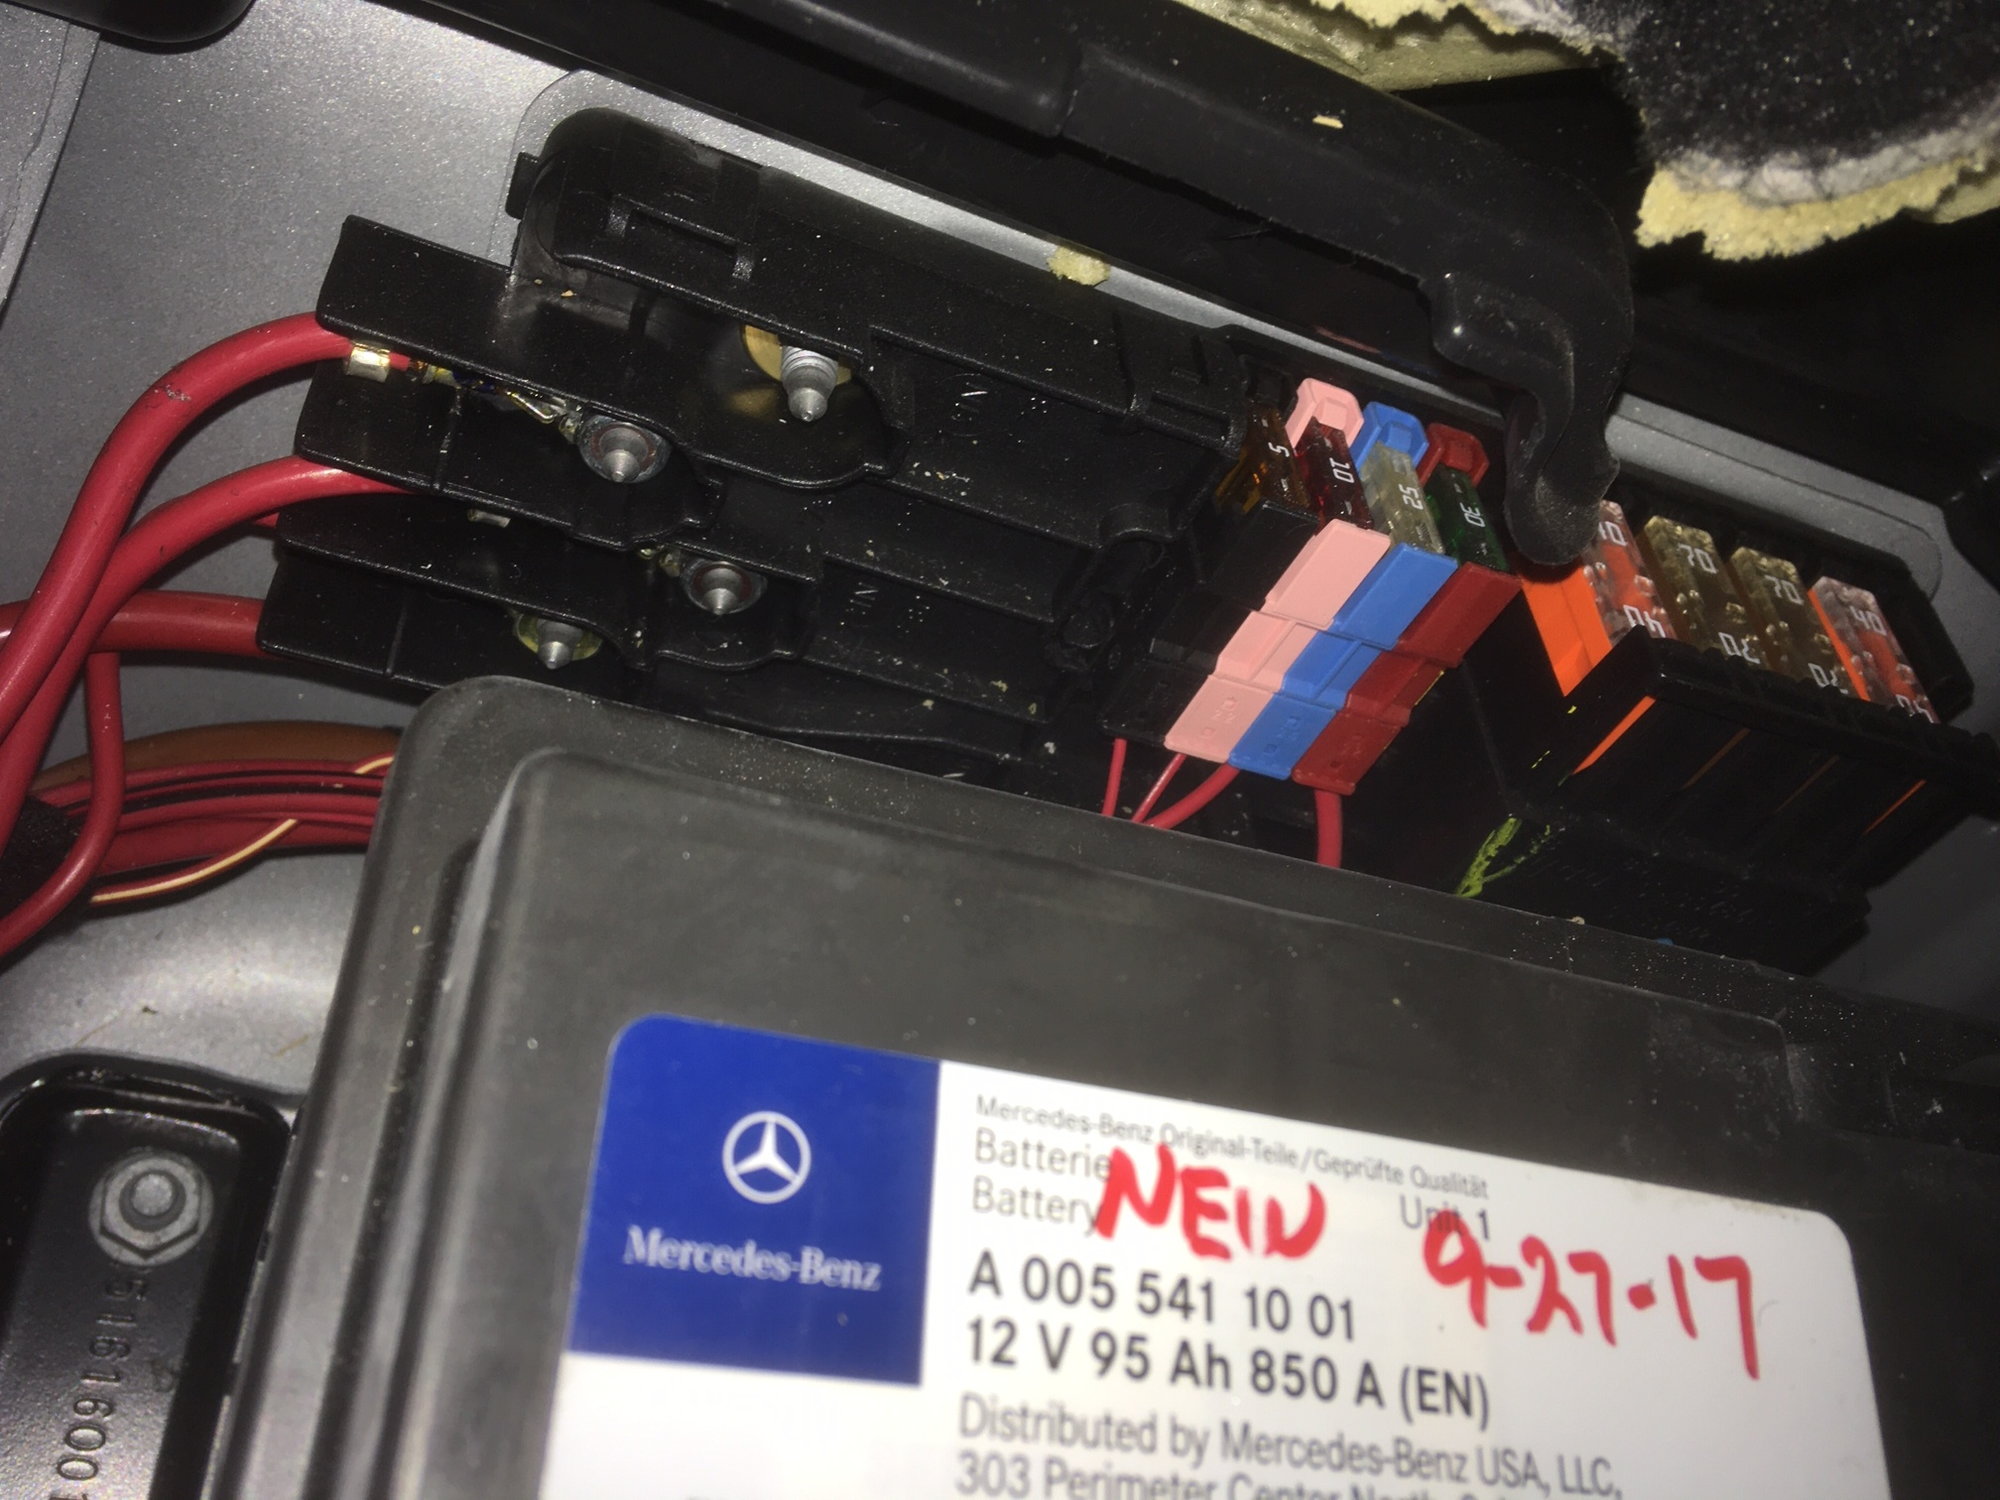 2006 Mercedes Ml350 Fuse Chart / Ml350 Fuse Box Diagram / Solved need a fuse diagram for ...